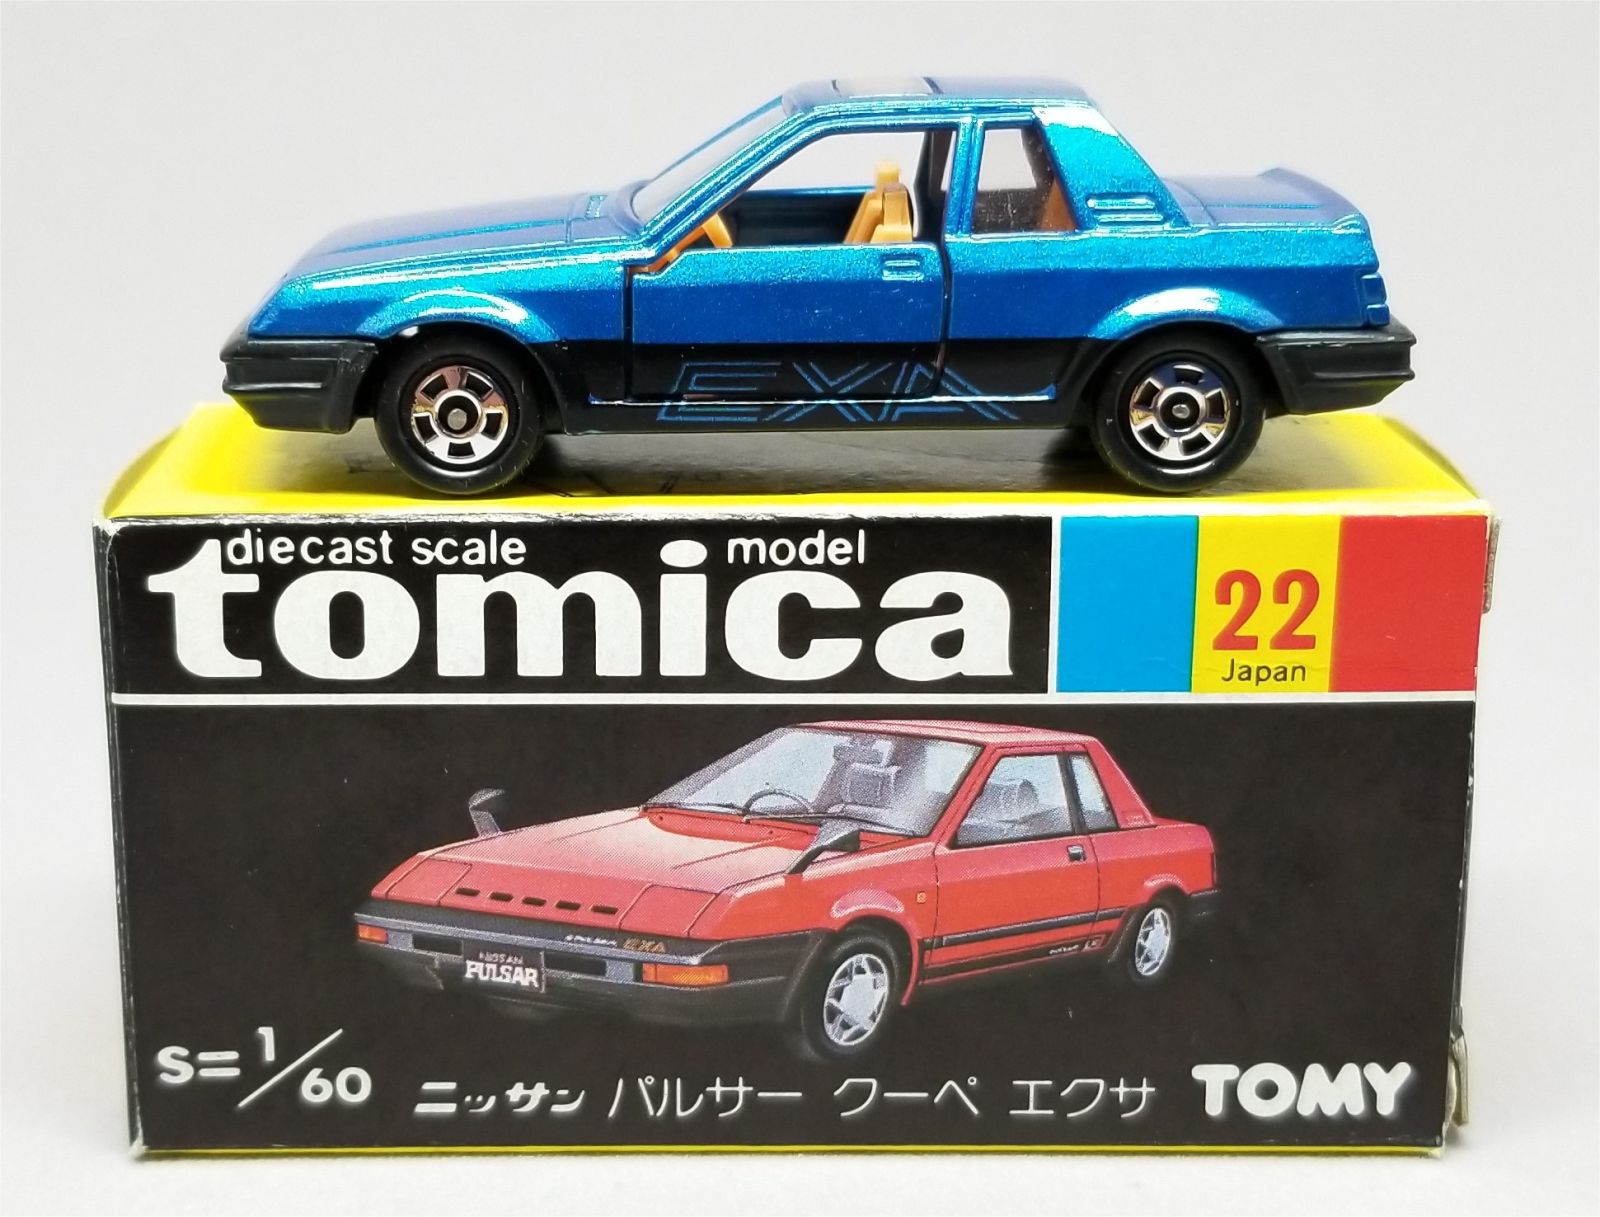 Illustration for article titled Radcast 2018: Tomica Nissan Pulsar Coupe EXA